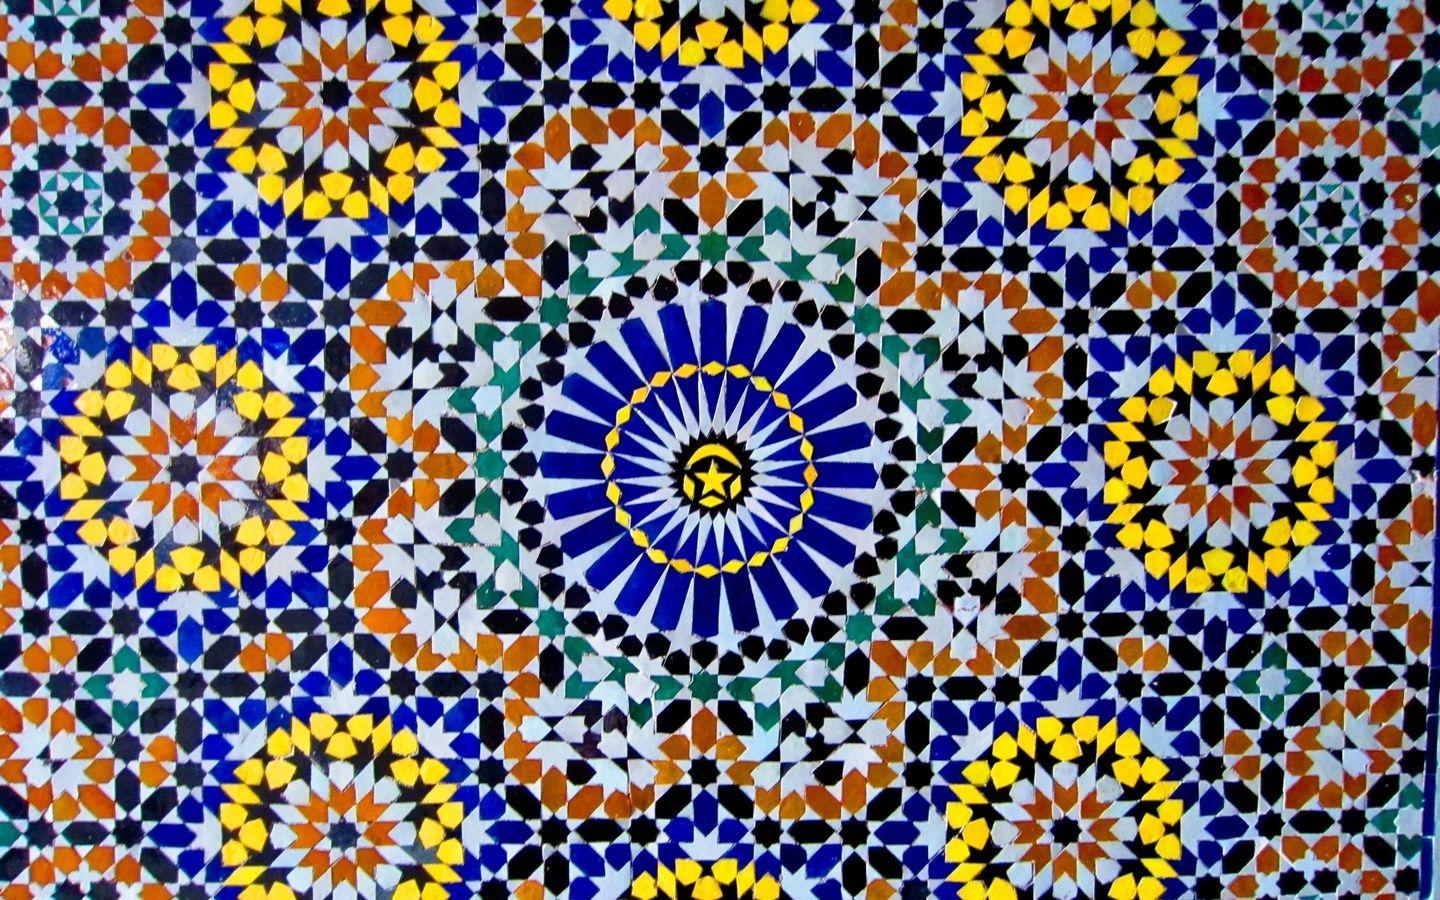 Moroccan Patterns, Moroccan Textures, Patterns, Morocco